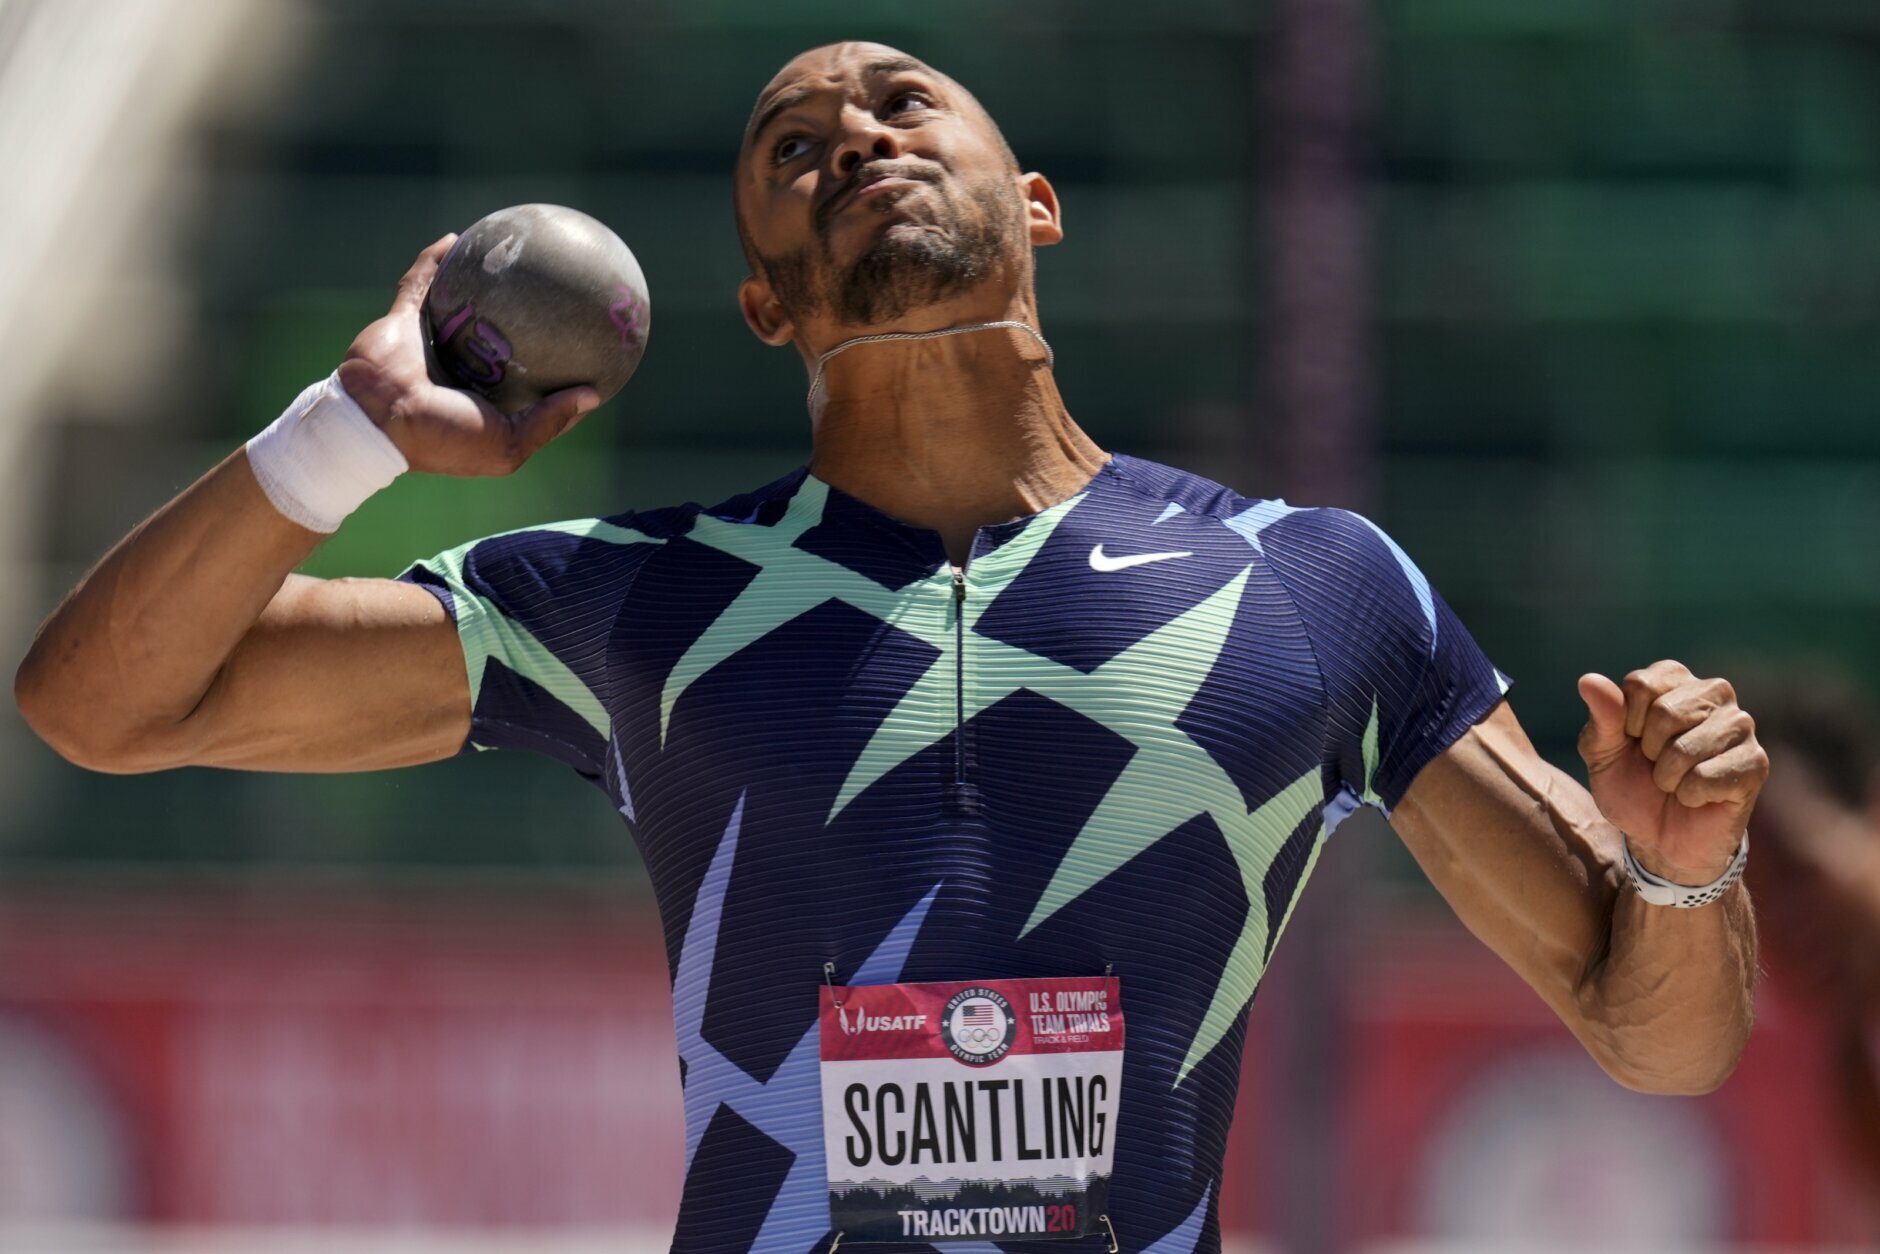 <p>Garrett Scantling competes during the decathlon shot put at the U.S. Olympic Track and Field Trials Saturday, June 19, 2021, in Eugene, Oregon.</p>
